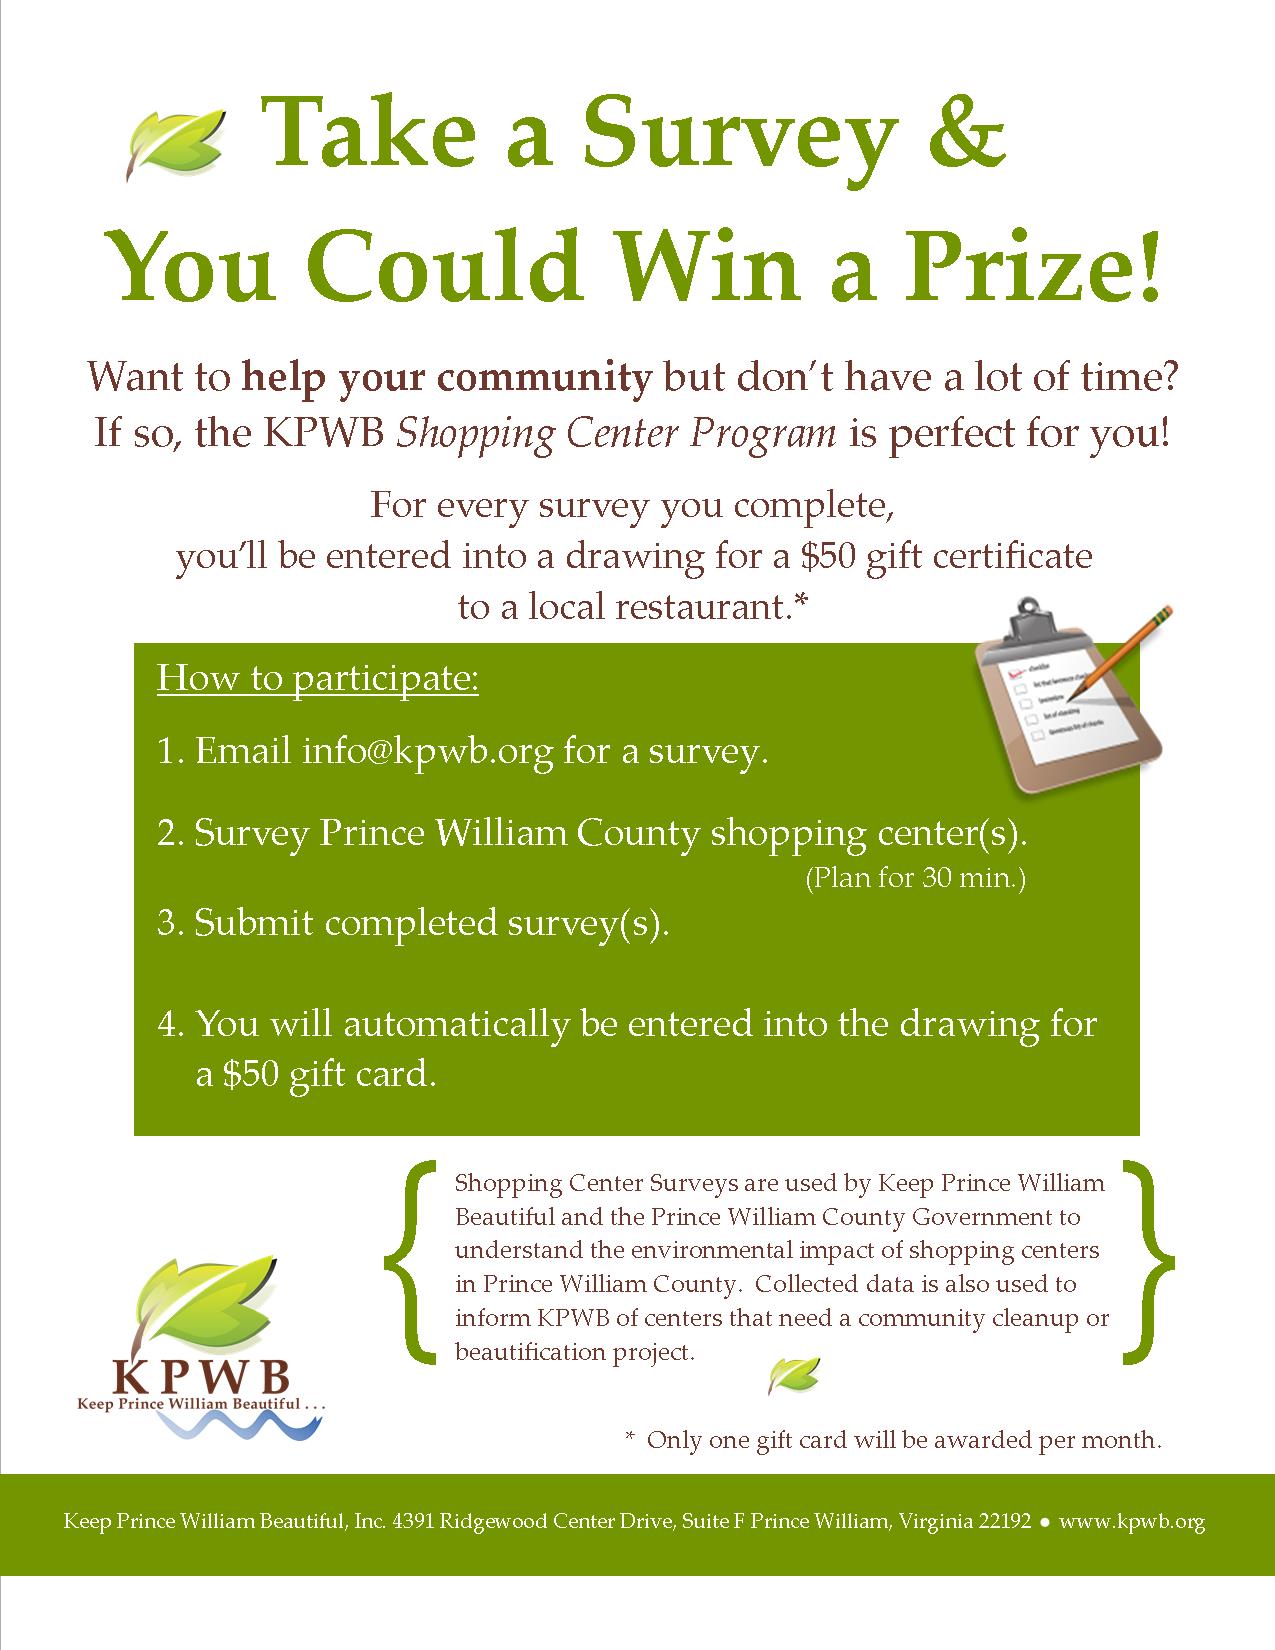 Survey a Shopping Center and You Could Win a Prize!